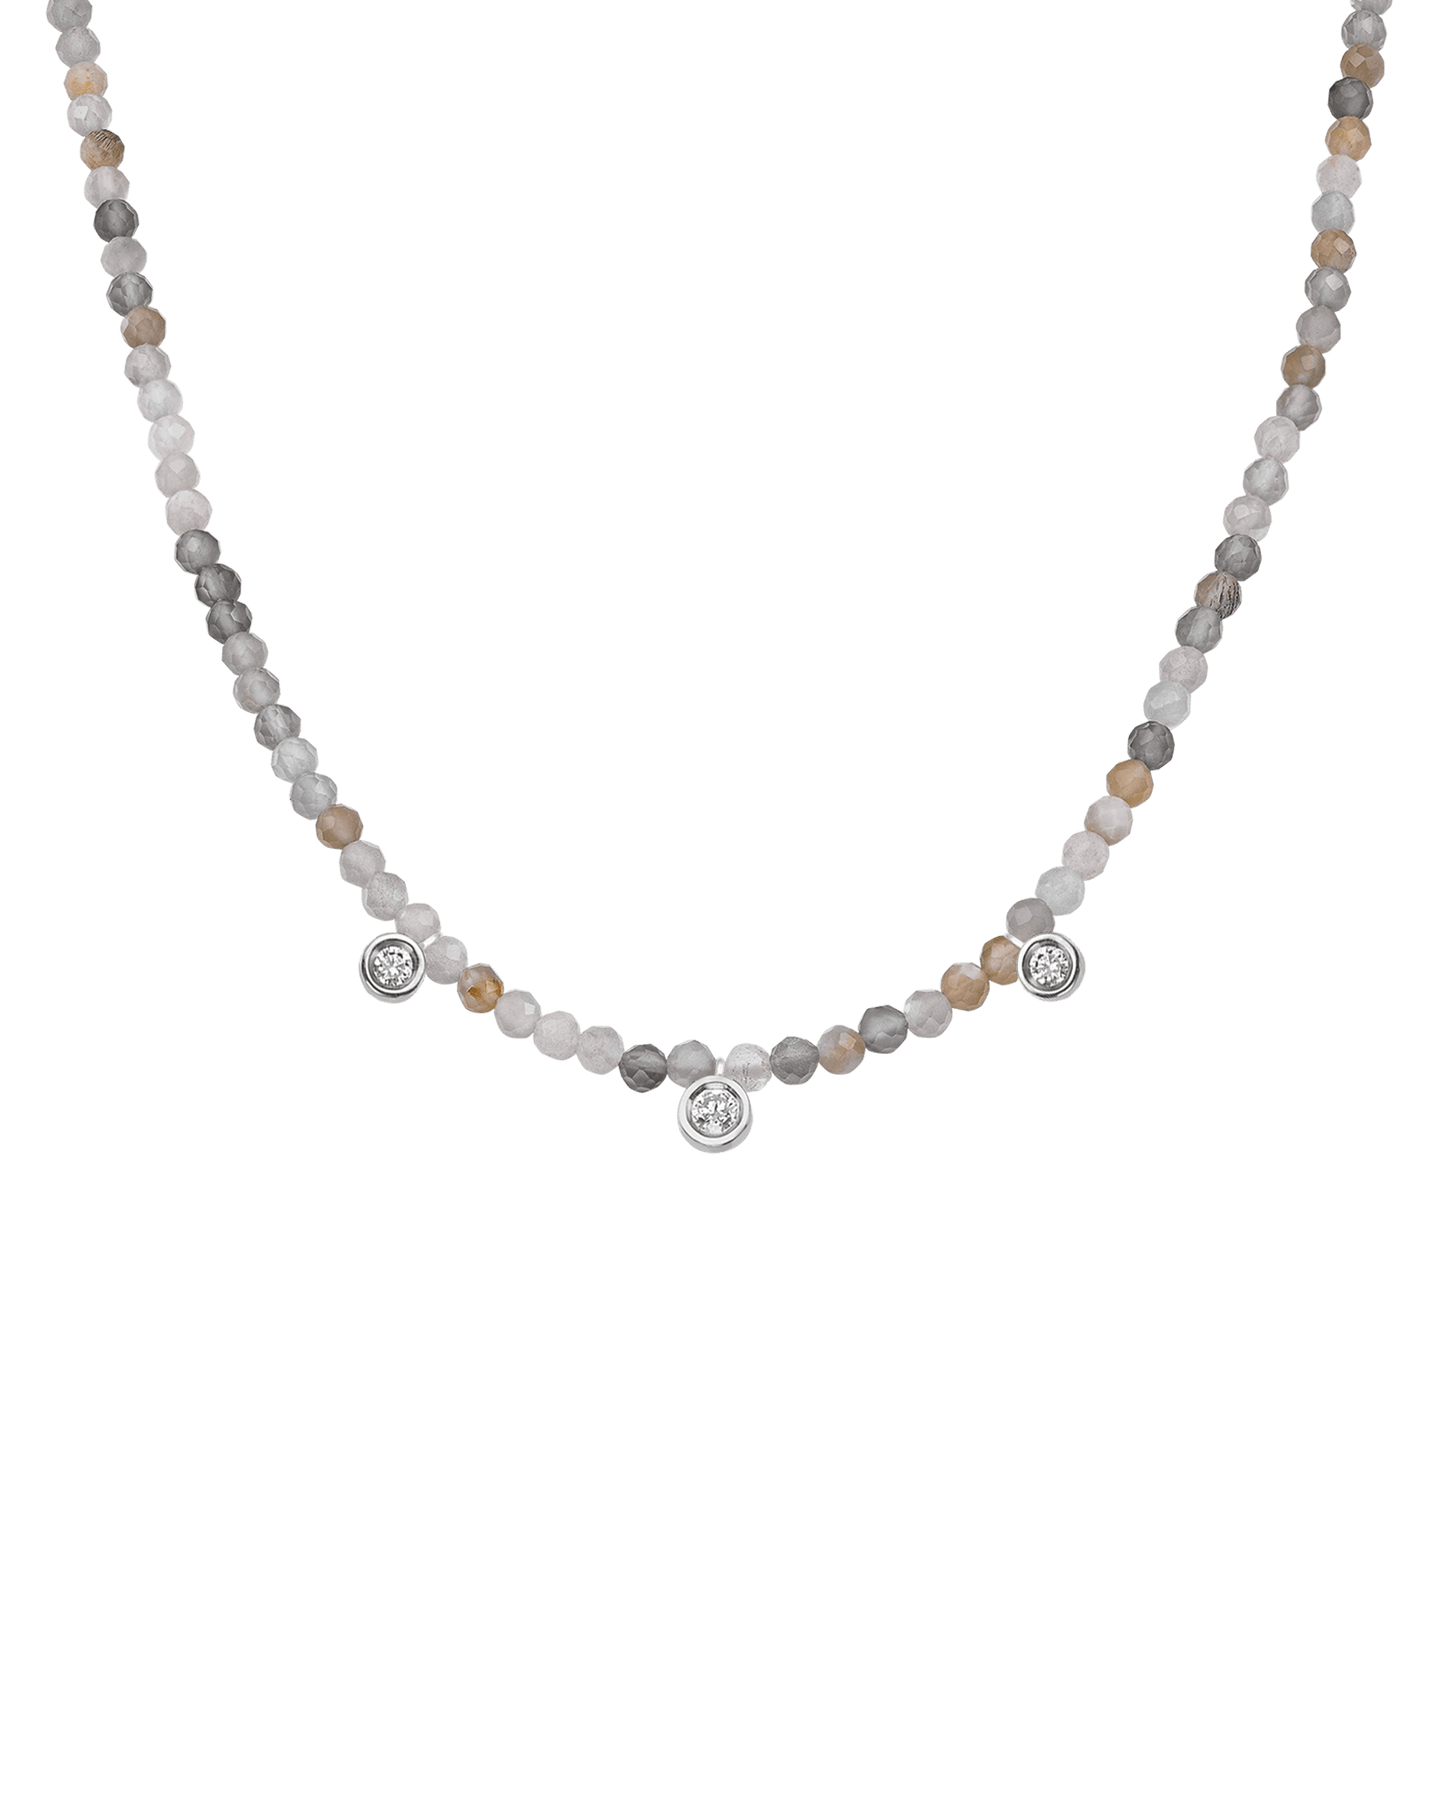 Apatite Gemstone & Three diamonds Necklace - 14K White Gold Necklaces magal-dev Natural Moonstone 14" - Collar 